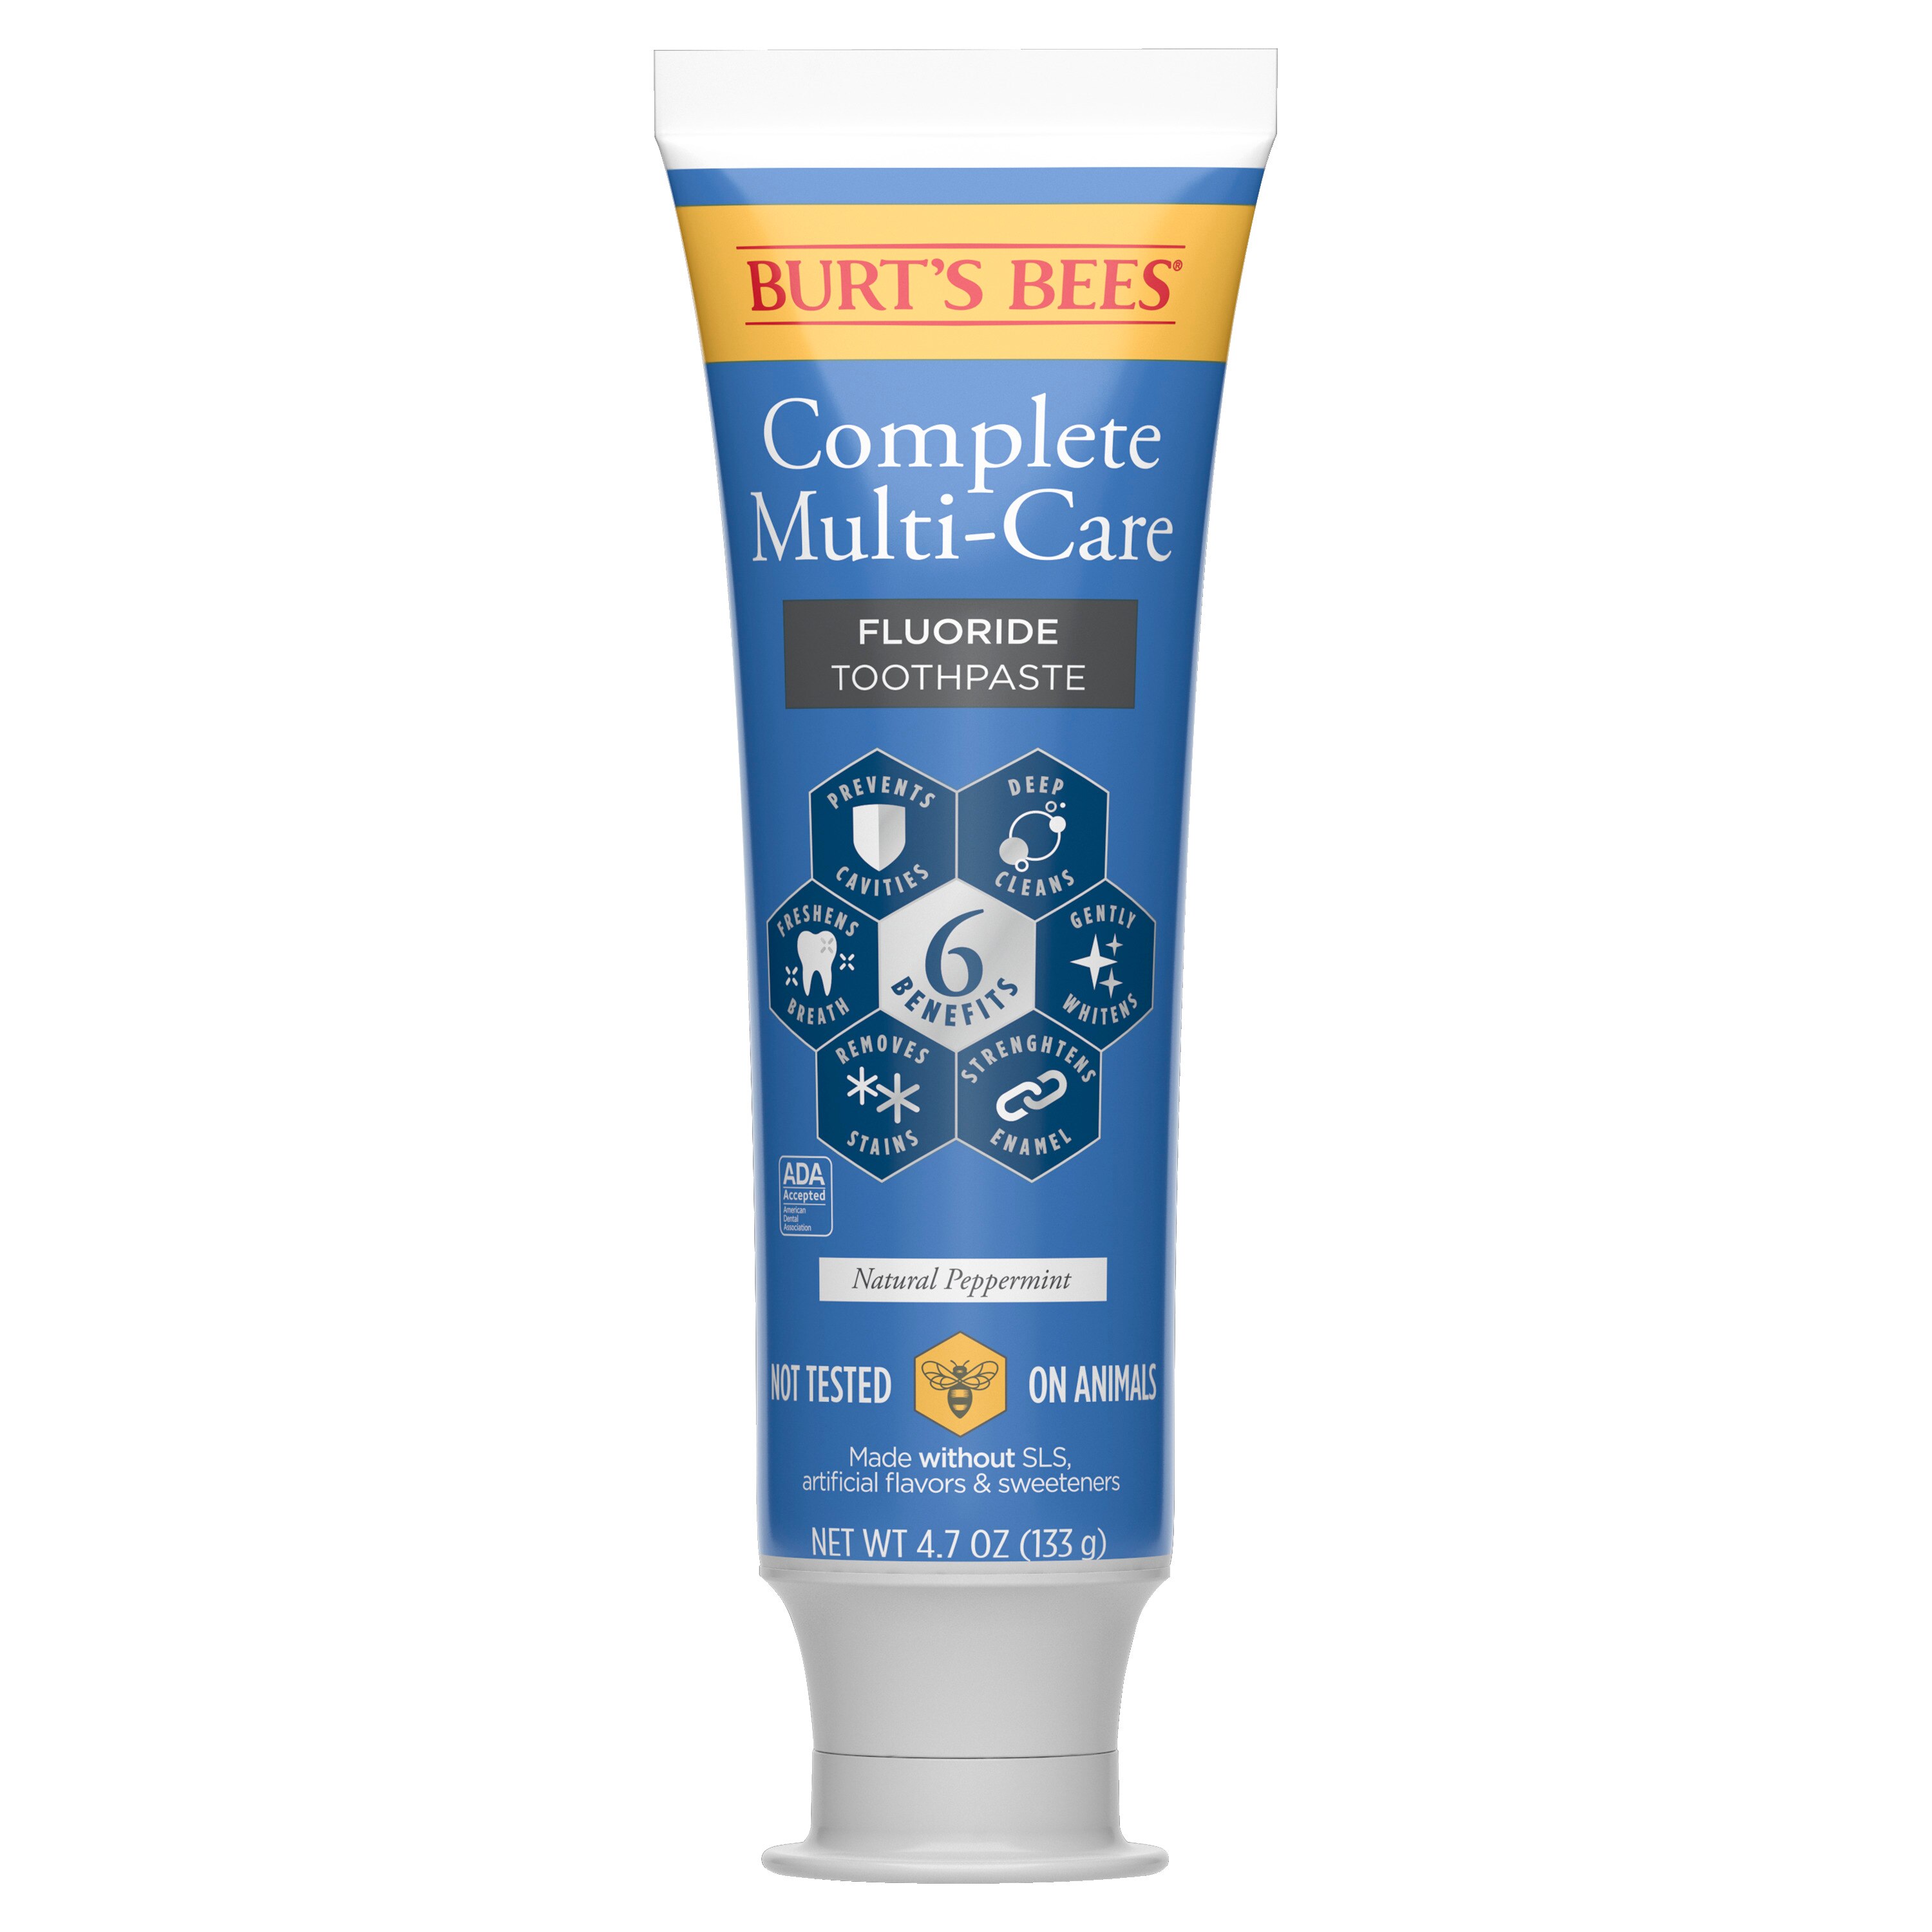 Burt's Bees Complete Multi-Care Fluoride Toothpaste, Natural Peppermint, 4.7 Oz , CVS